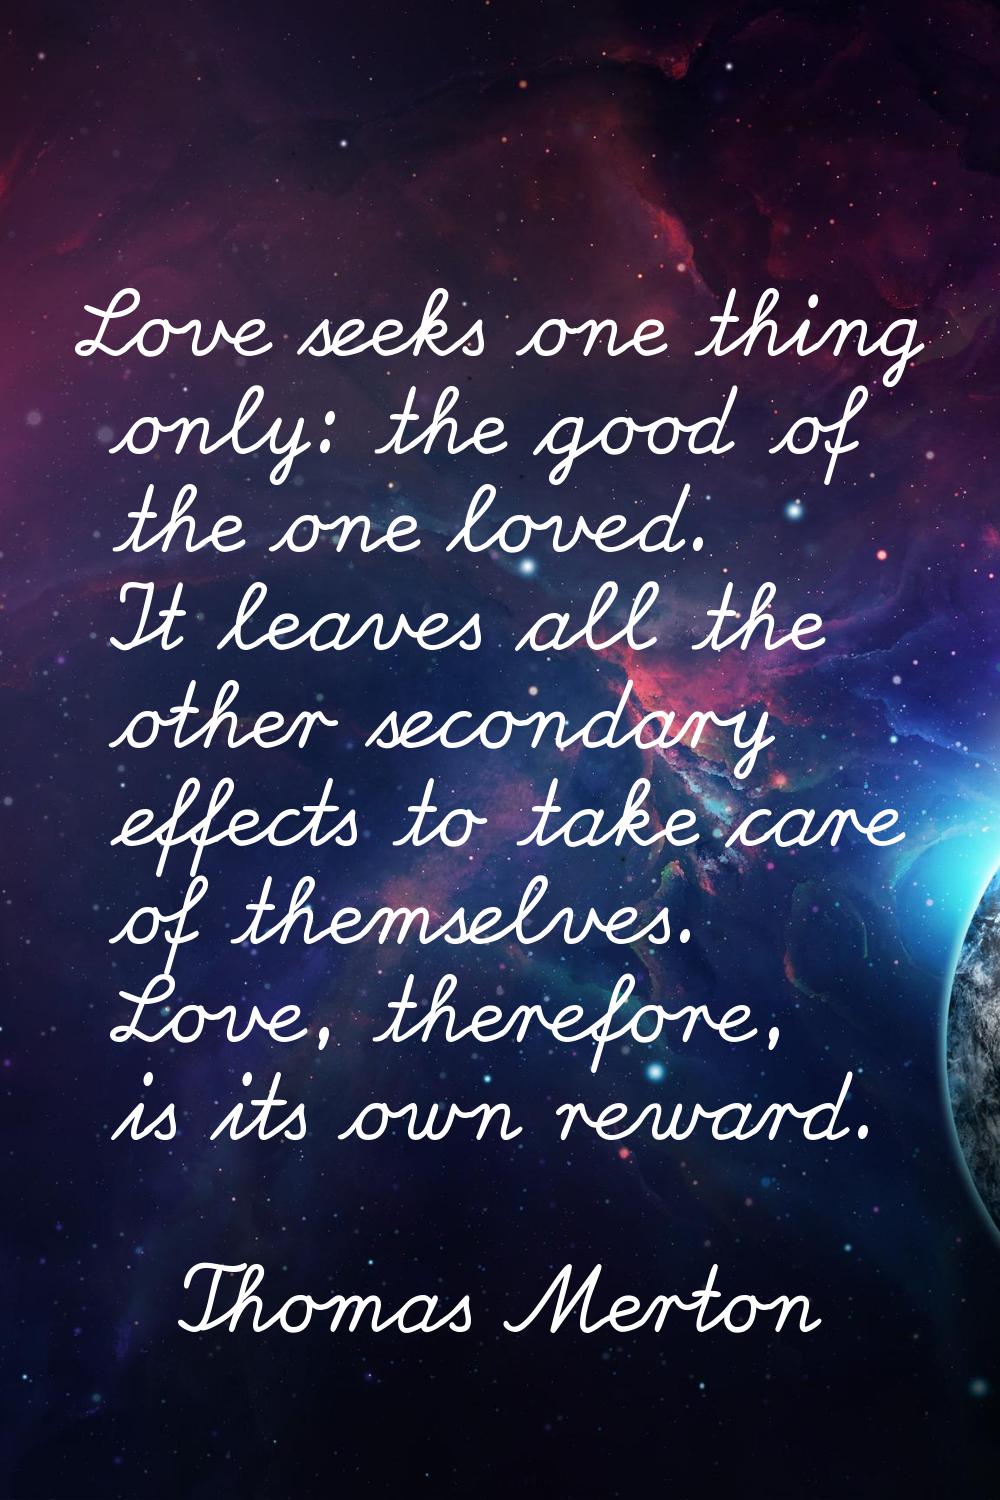 Love seeks one thing only: the good of the one loved. It leaves all the other secondary effects to 